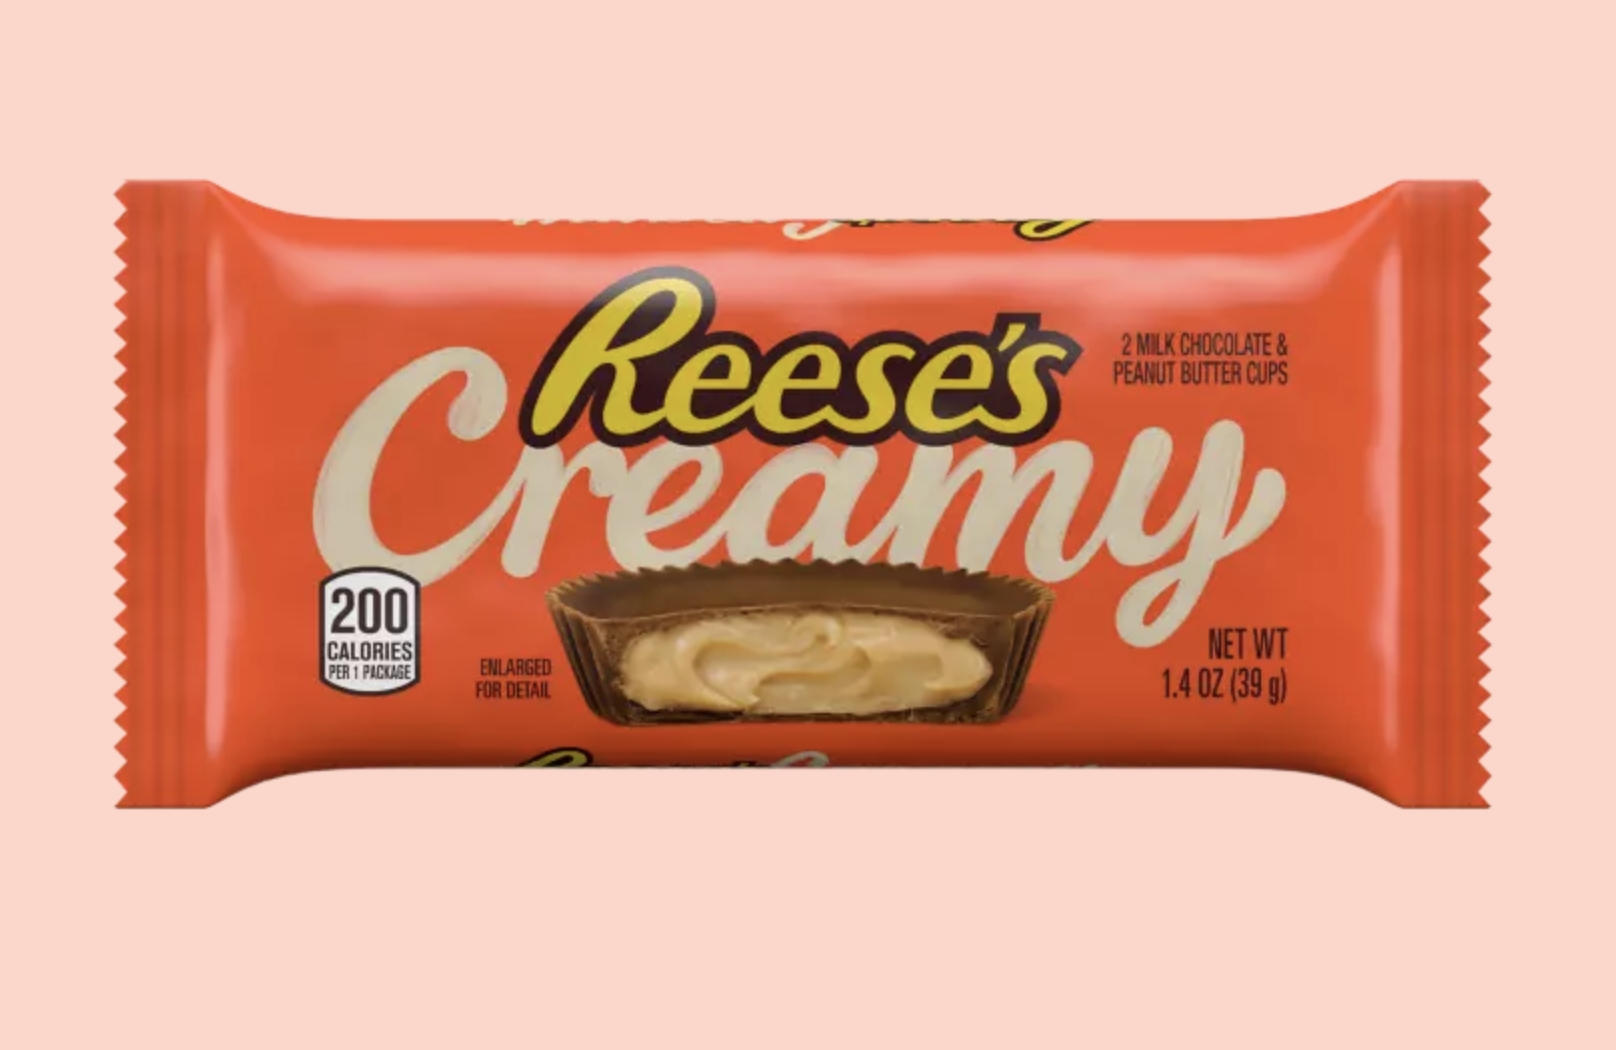 Reese's Creamy Peanut Butter Cups